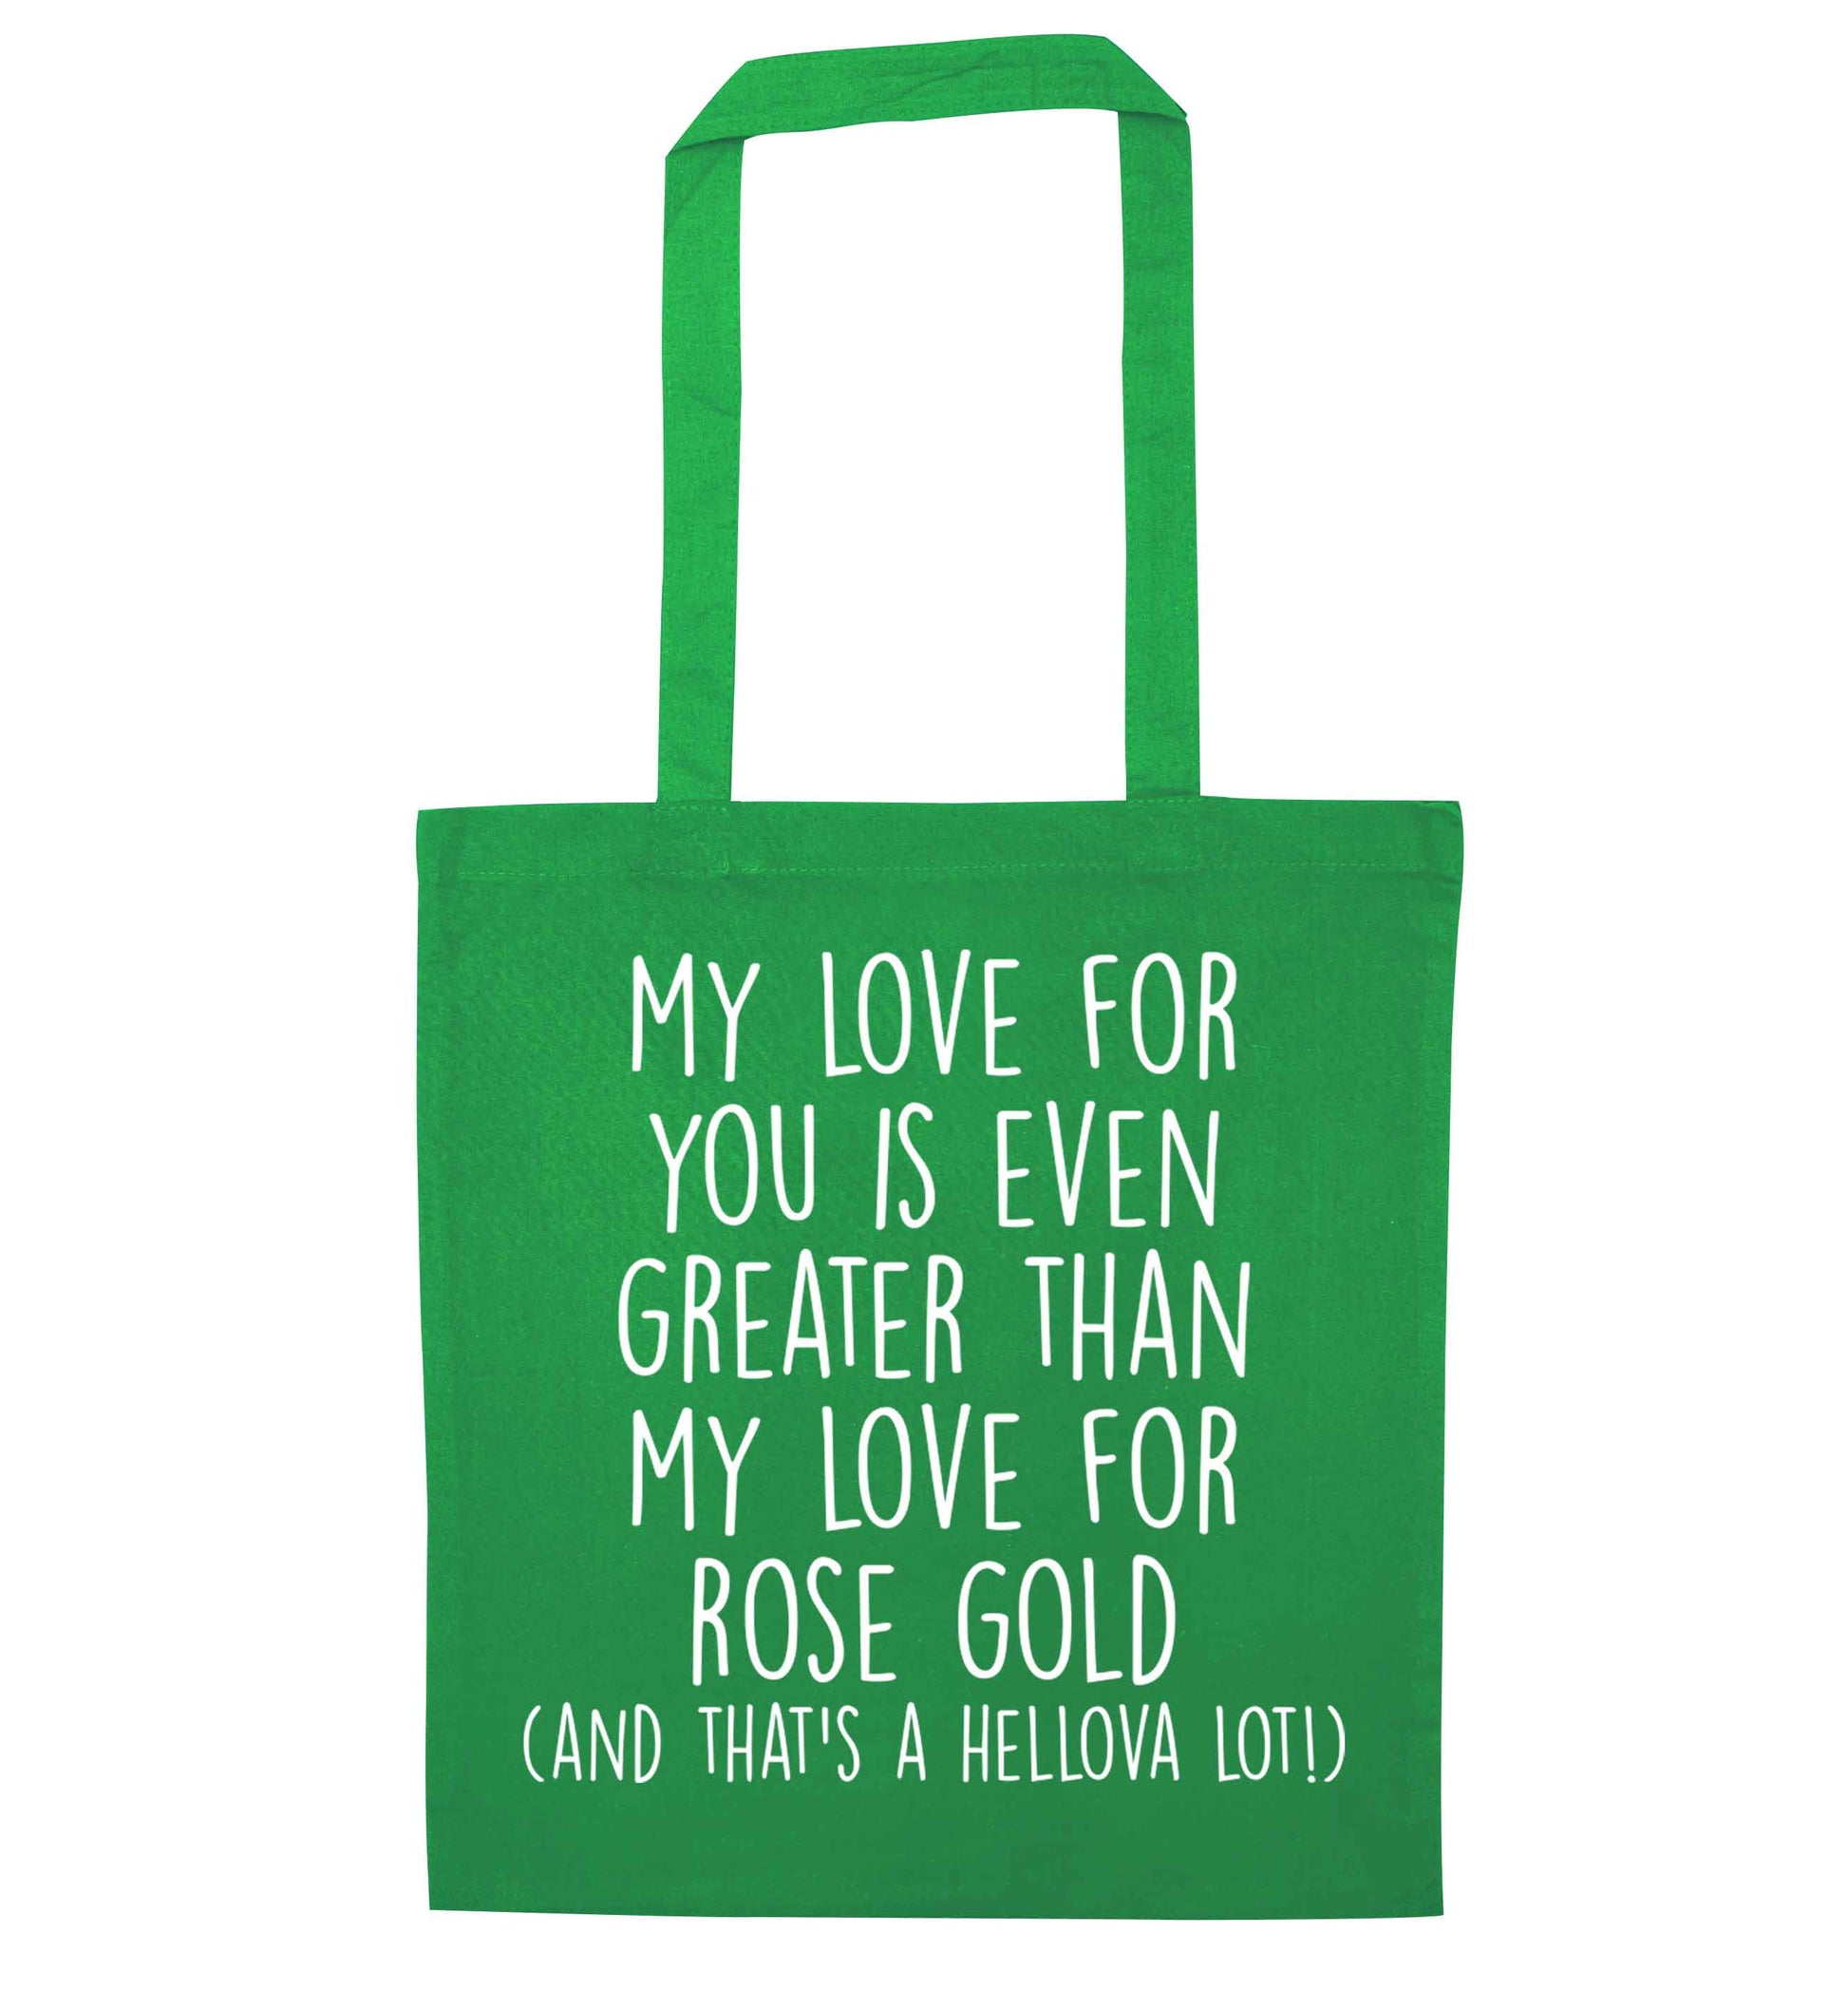 My love for you is even greater than my love for rose gold (and that's a hellova lot) green tote bag